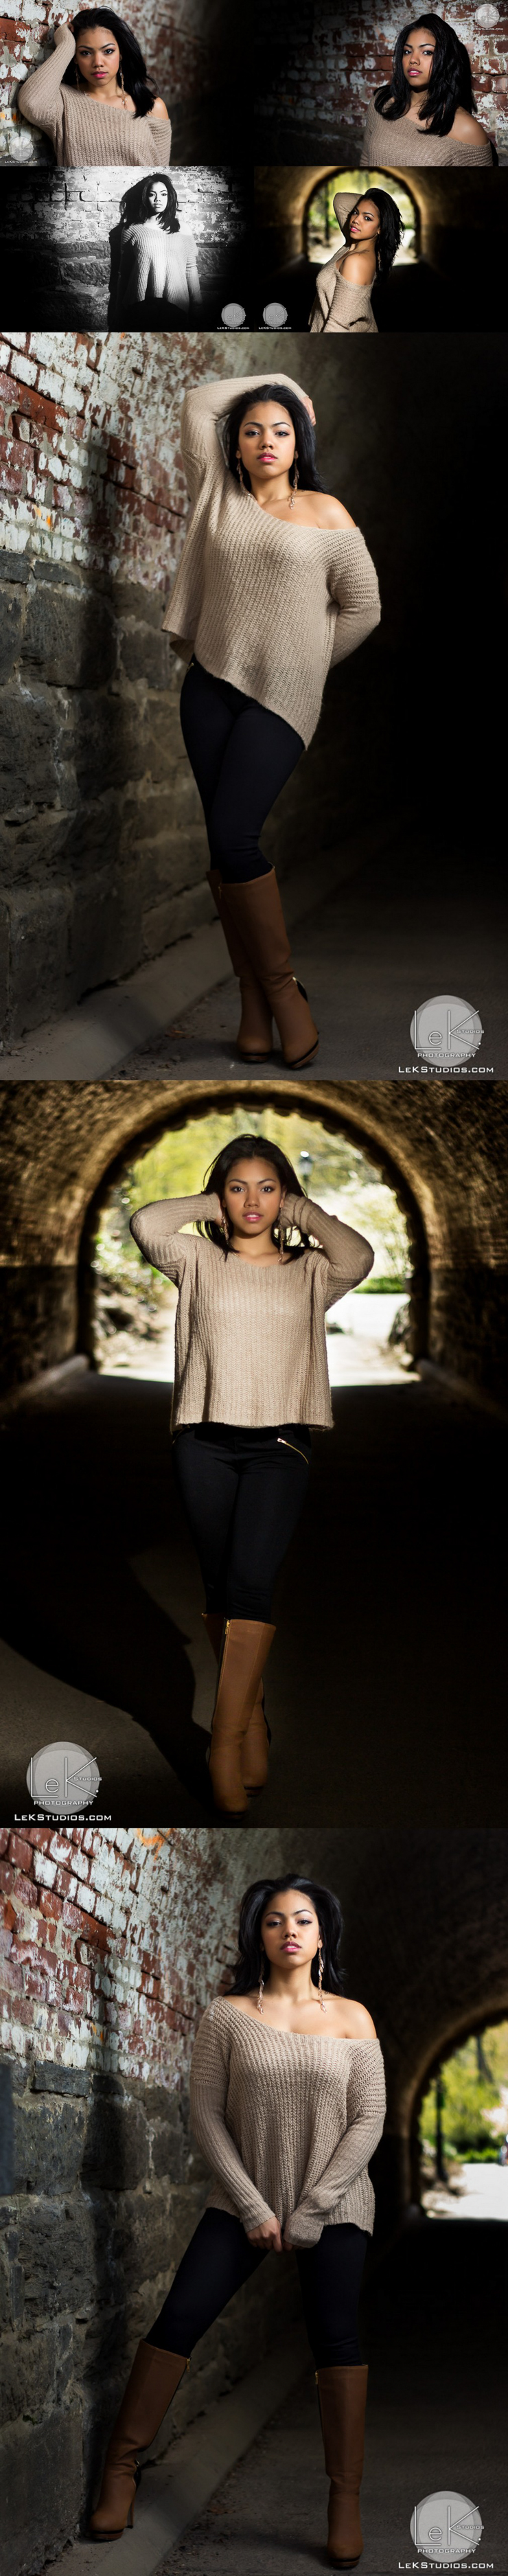 Male and Female model photo shoot of LeK Studios and Yesica M Olivo in Central Park